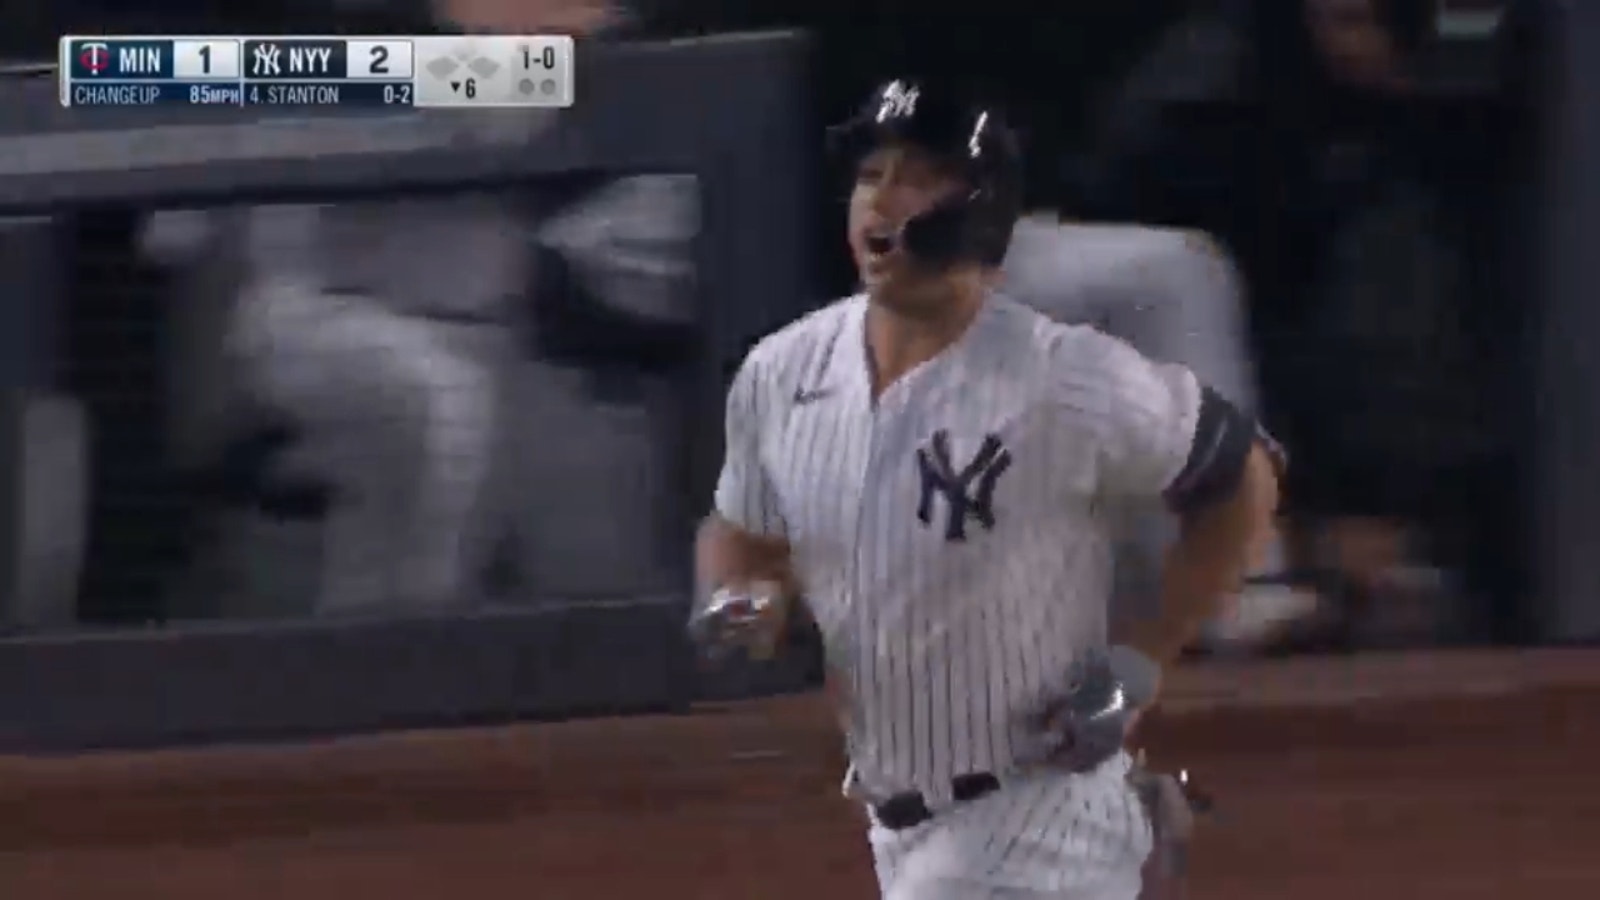 Giancarlo Stanton rips a home run to extend the Yankees' lead over the Twins